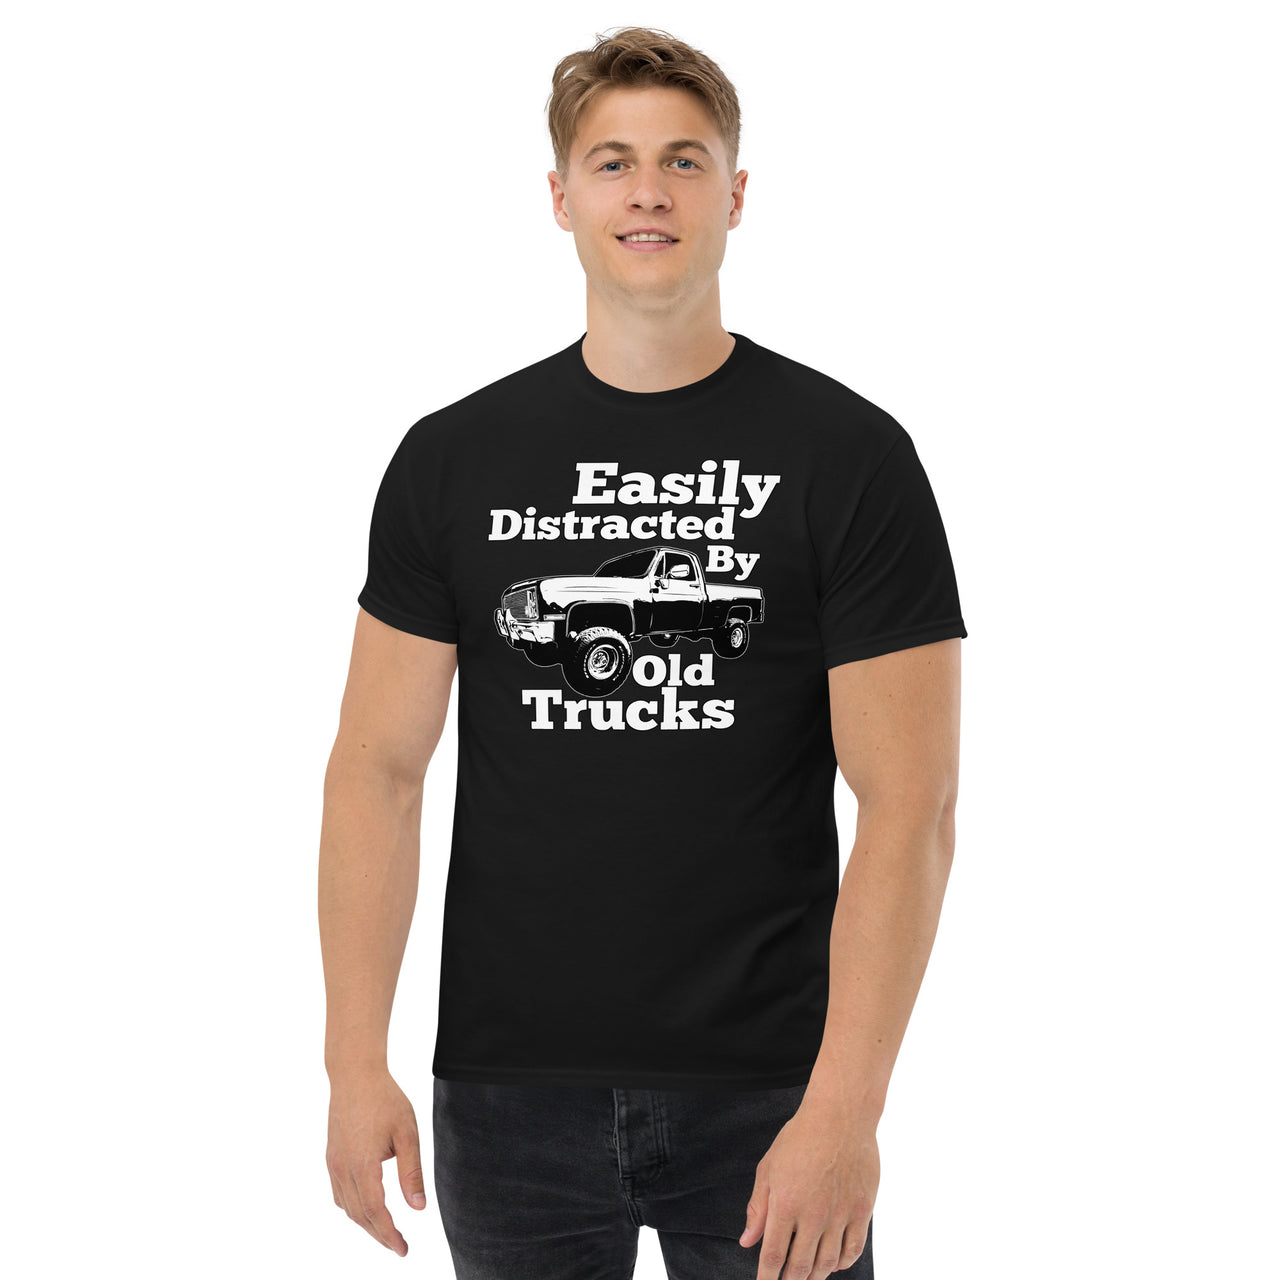 man modeling Square Body Truck T-Shirt - Easily Distracted By Old Trucks